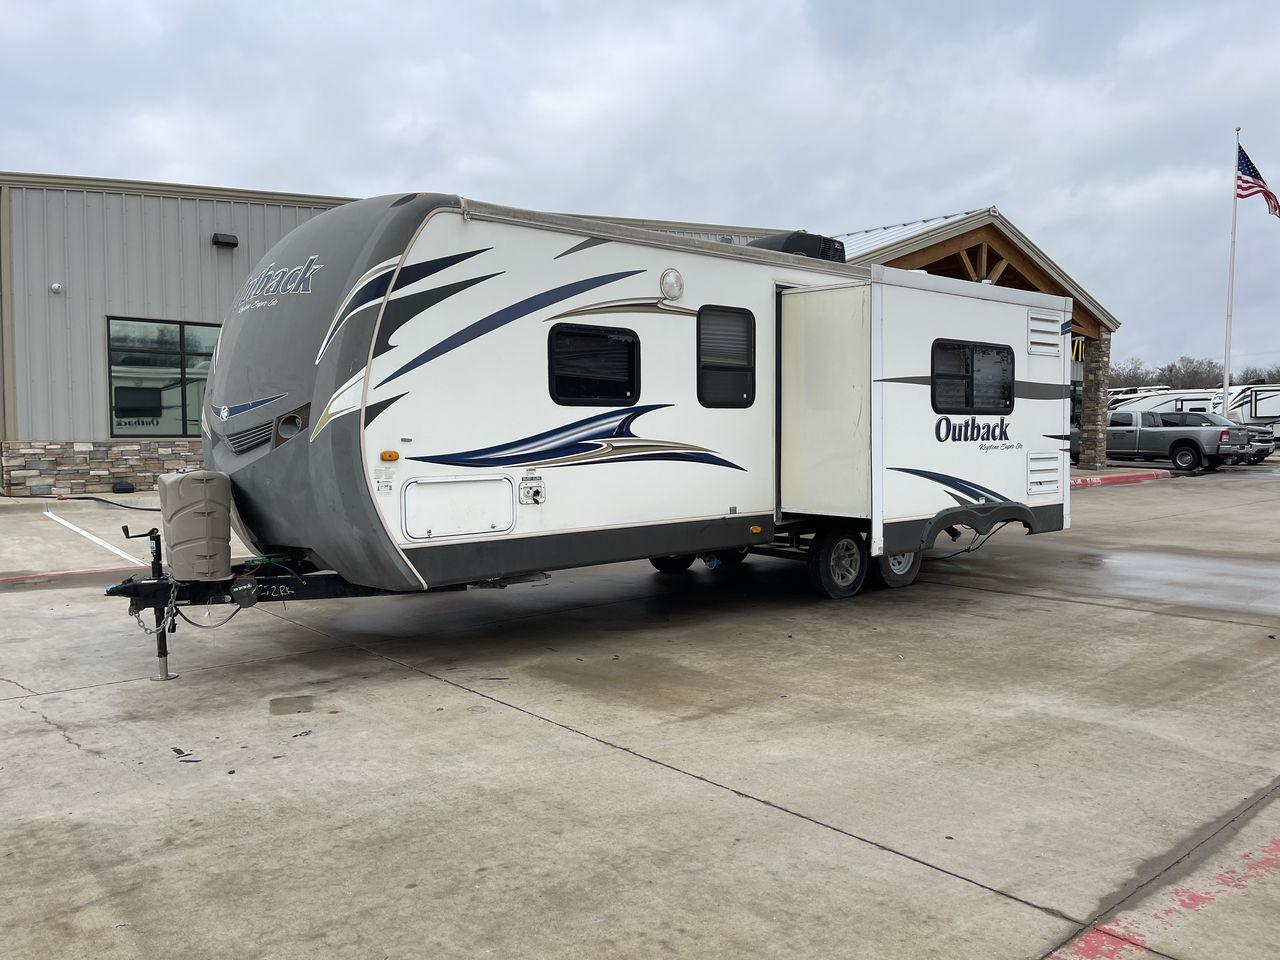 2012 WHITE KEYSTONE OUTBACK 272RK (4YDT27227CB) , Length: 30.33 ft. | Dry Weight: 5,976 lbs. | Gross Weight: 7,800 lbs. | Slides: 1 transmission, located at 4319 N Main St, Cleburne, TX, 76033, (817) 678-5133, 32.385960, -97.391212 - Explore more reasons that emphasize the benefits of having this RV as your own. (1) Navigate campsites and winding roads with ease thanks to the single-axle design and 30' 4"" length. (2) Built to withstand the elements, the Outback is ready for all your outdoor adventures. (3) Keep clothes and - Photo #23